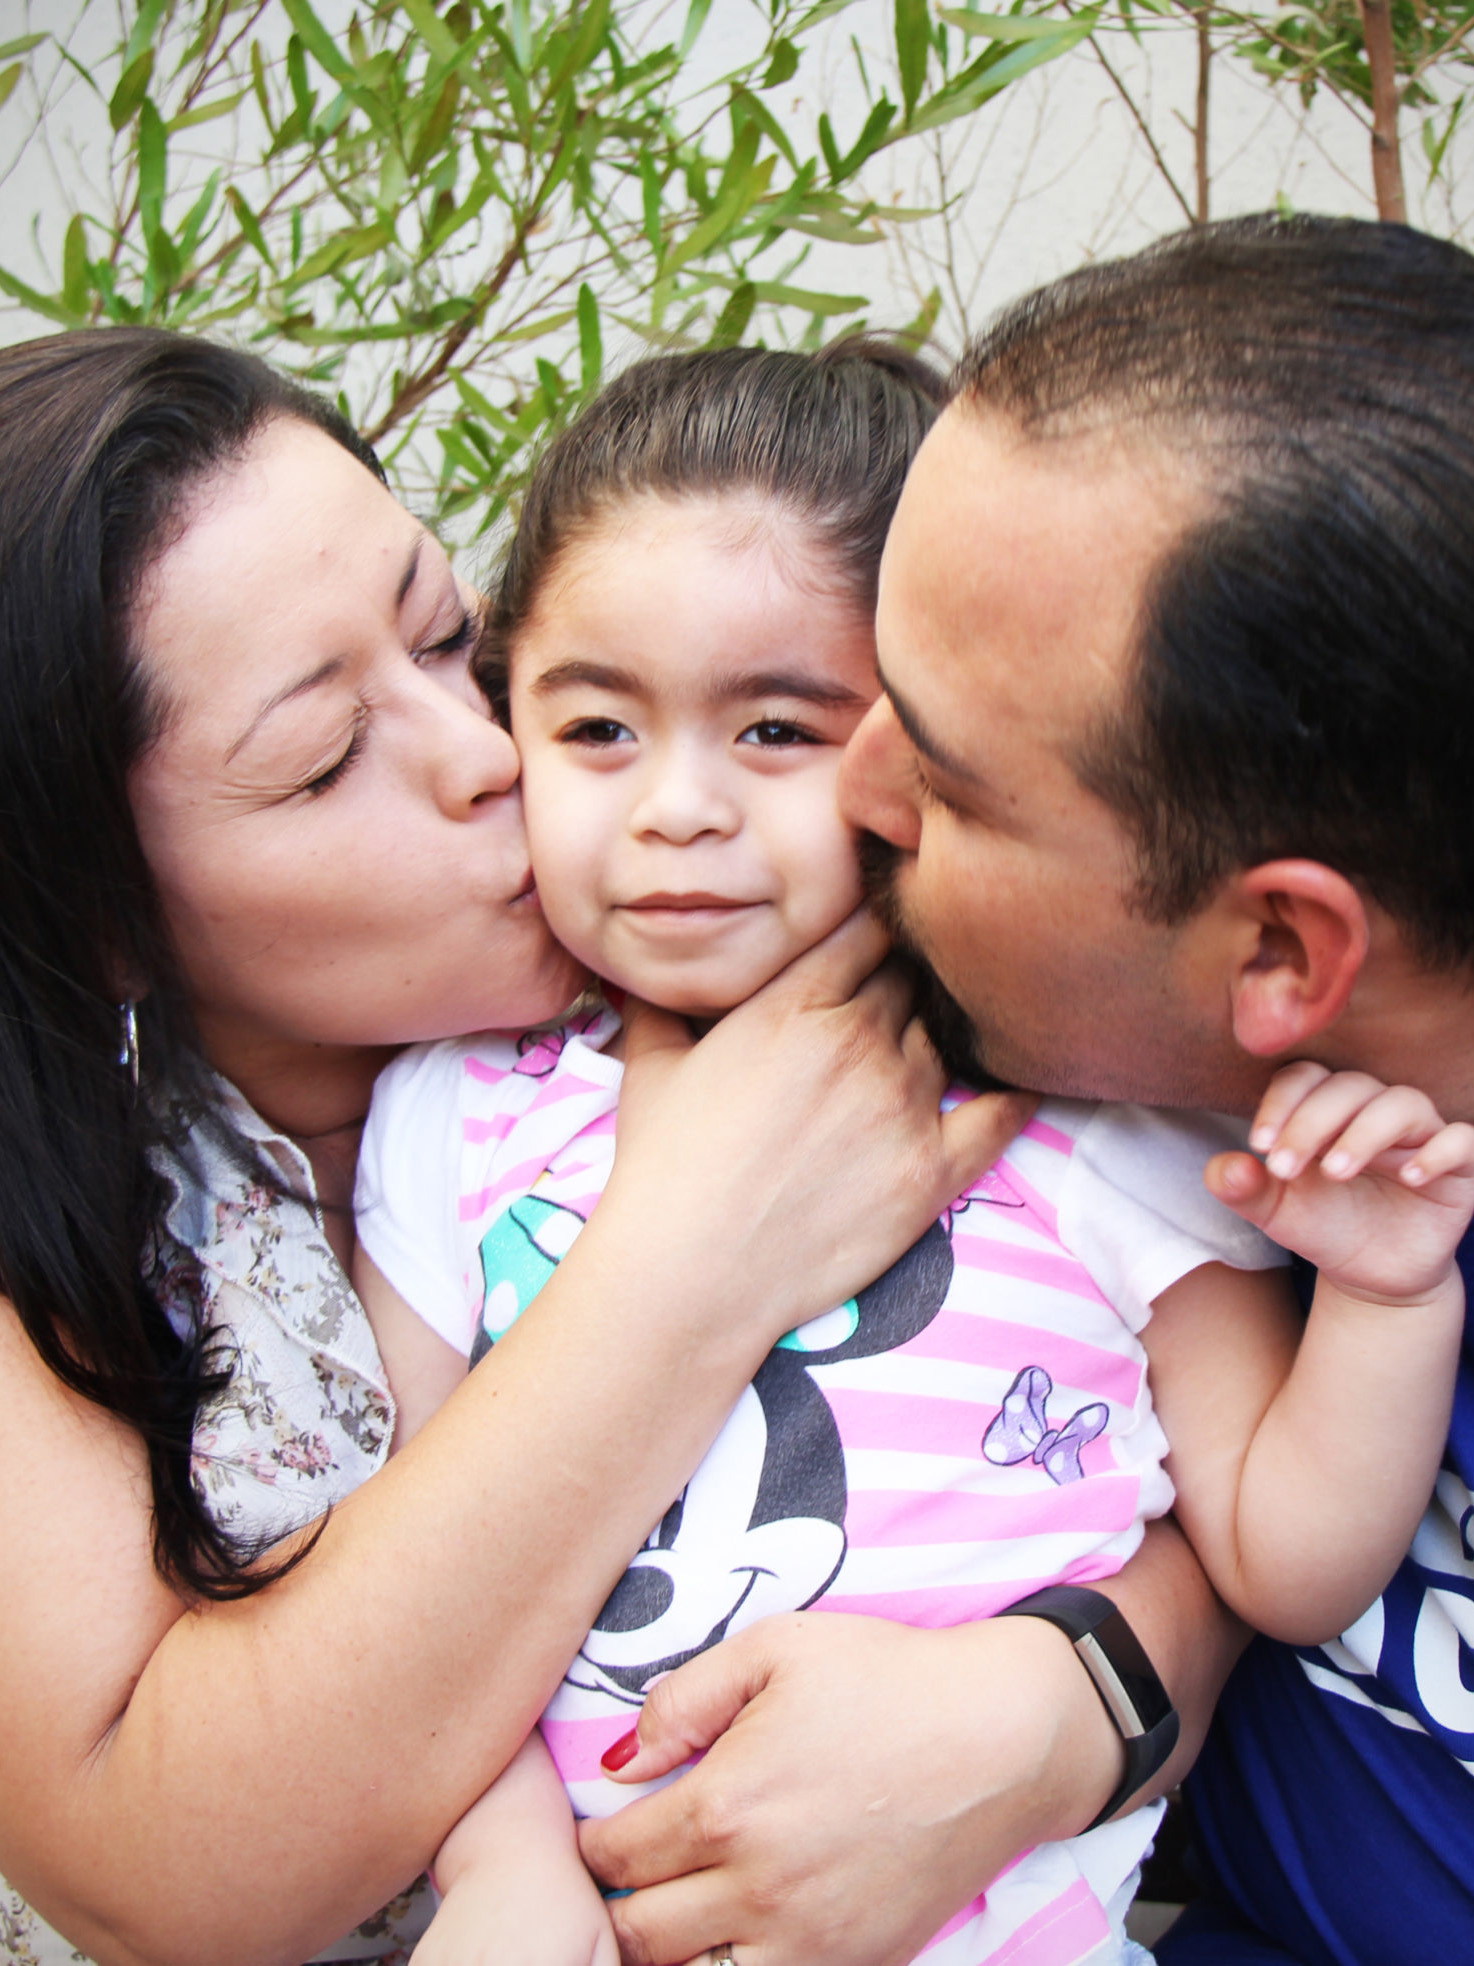 Gladys Salazar and Paul Gomez kissing ther daughter on the cheek